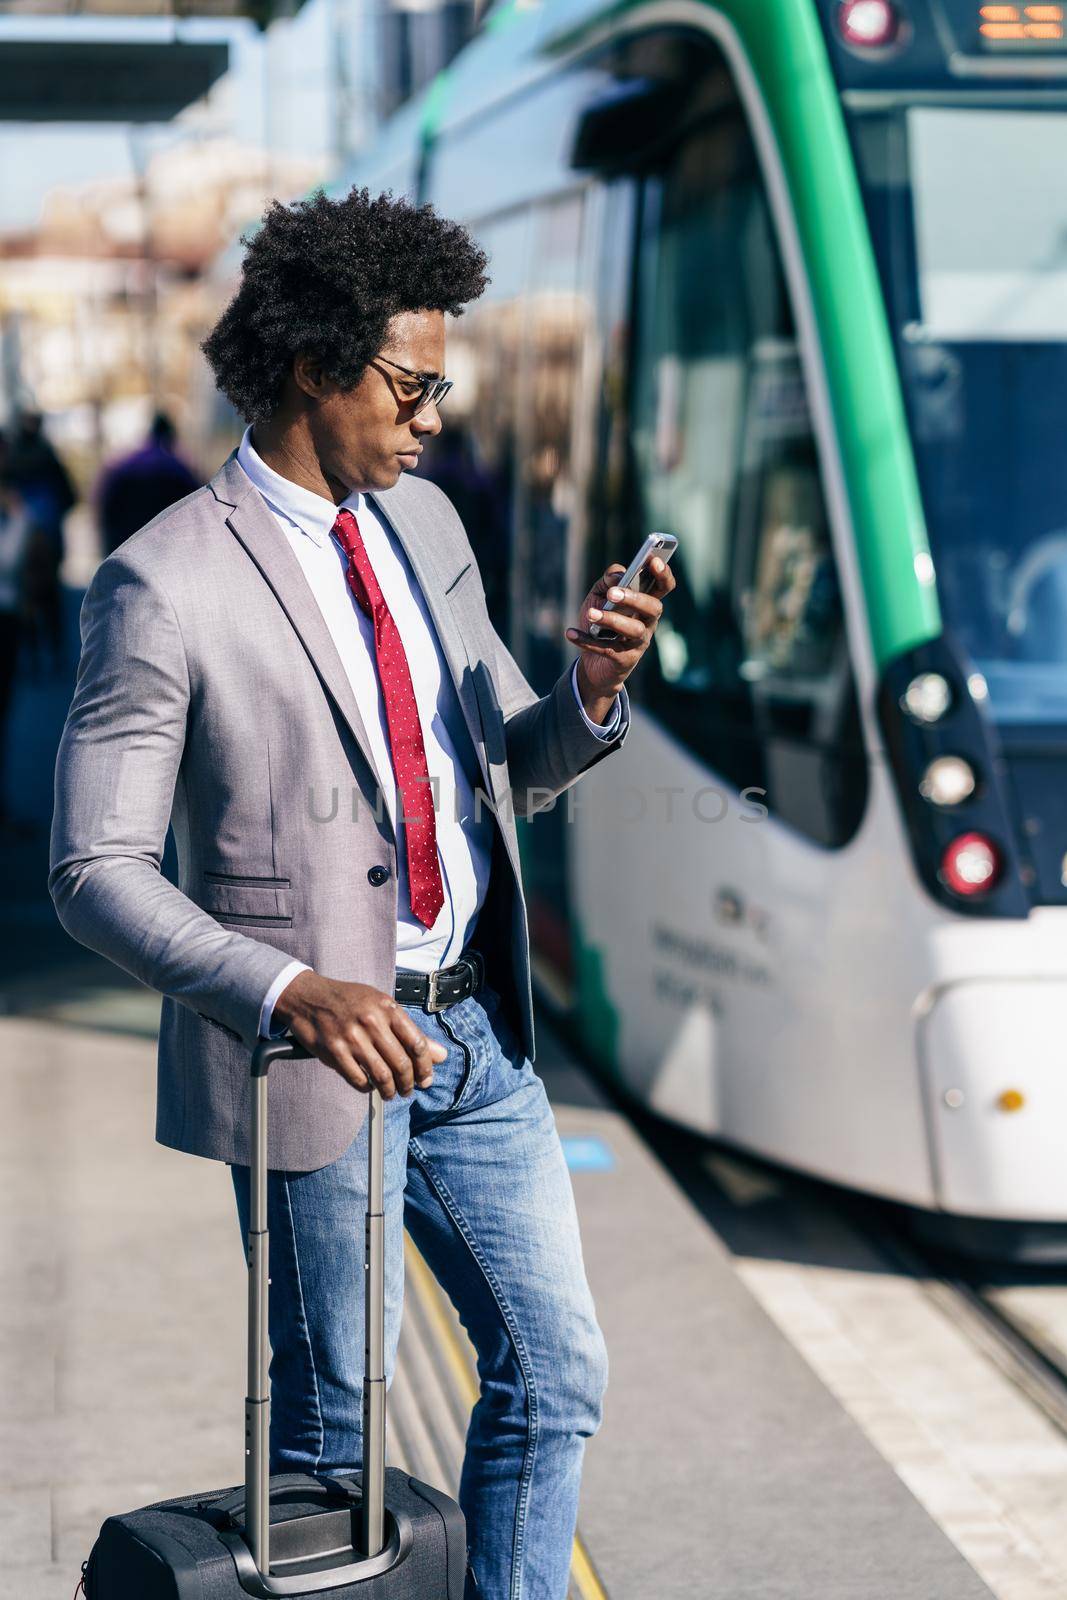 Black Businessman wearing suit waiting his train on an outdoors station. Man with afro hair.